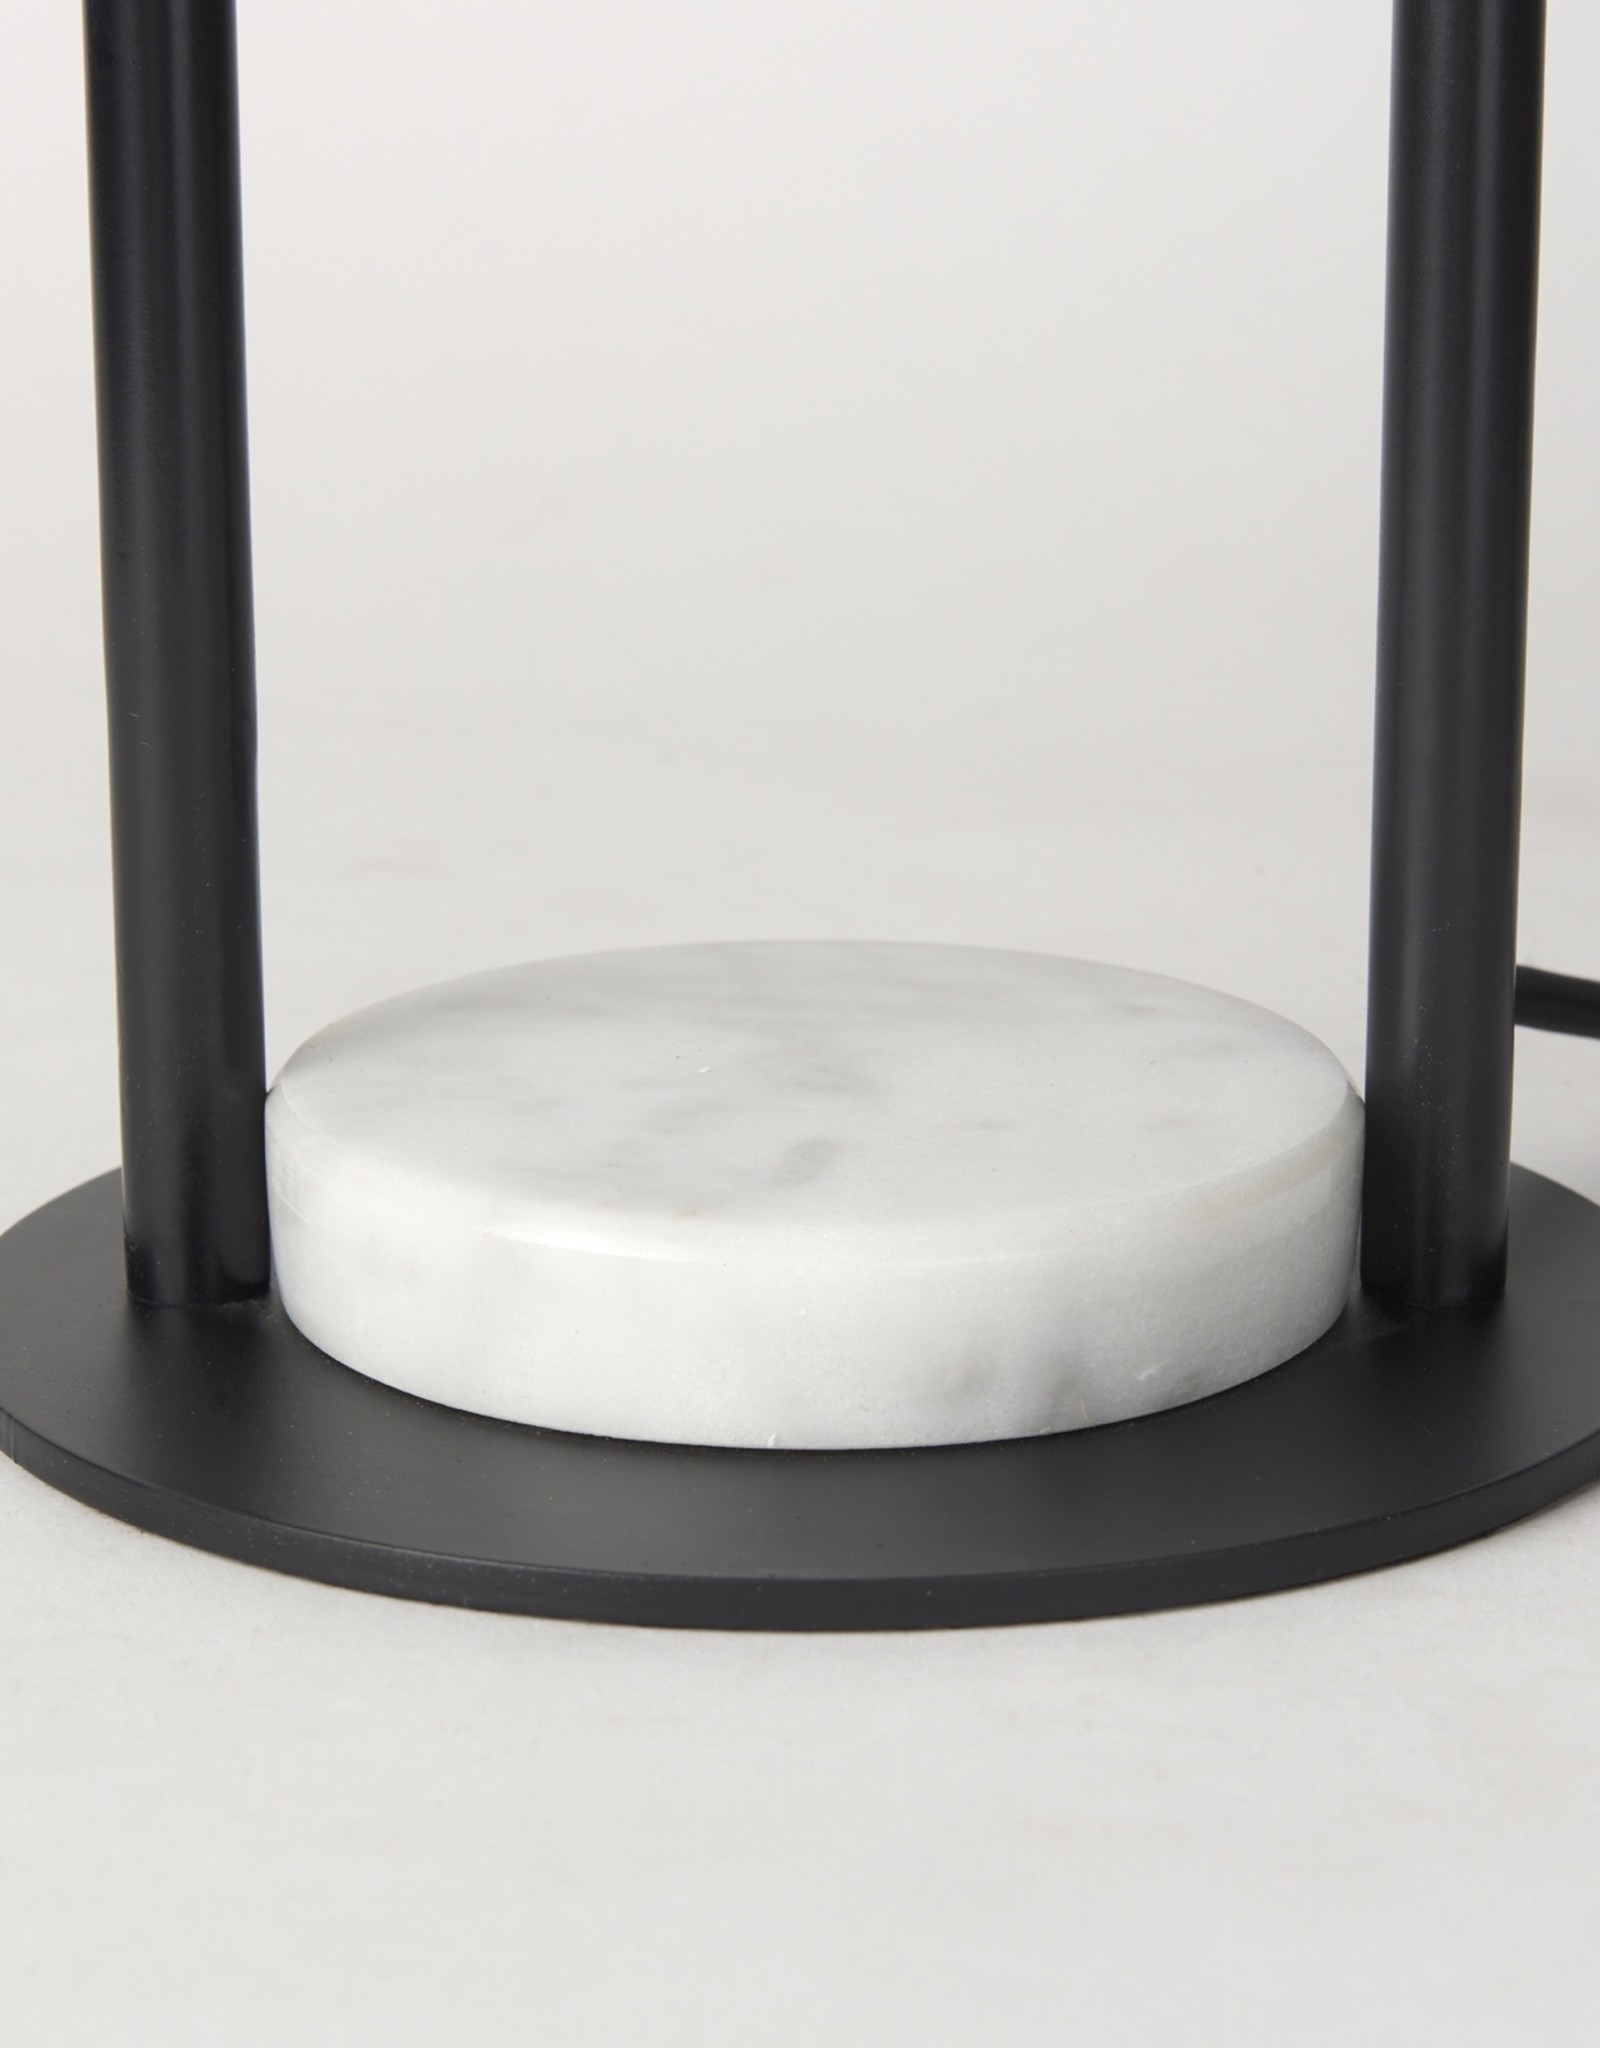 Sarah Arched Black Metal & Marble Table Lamp